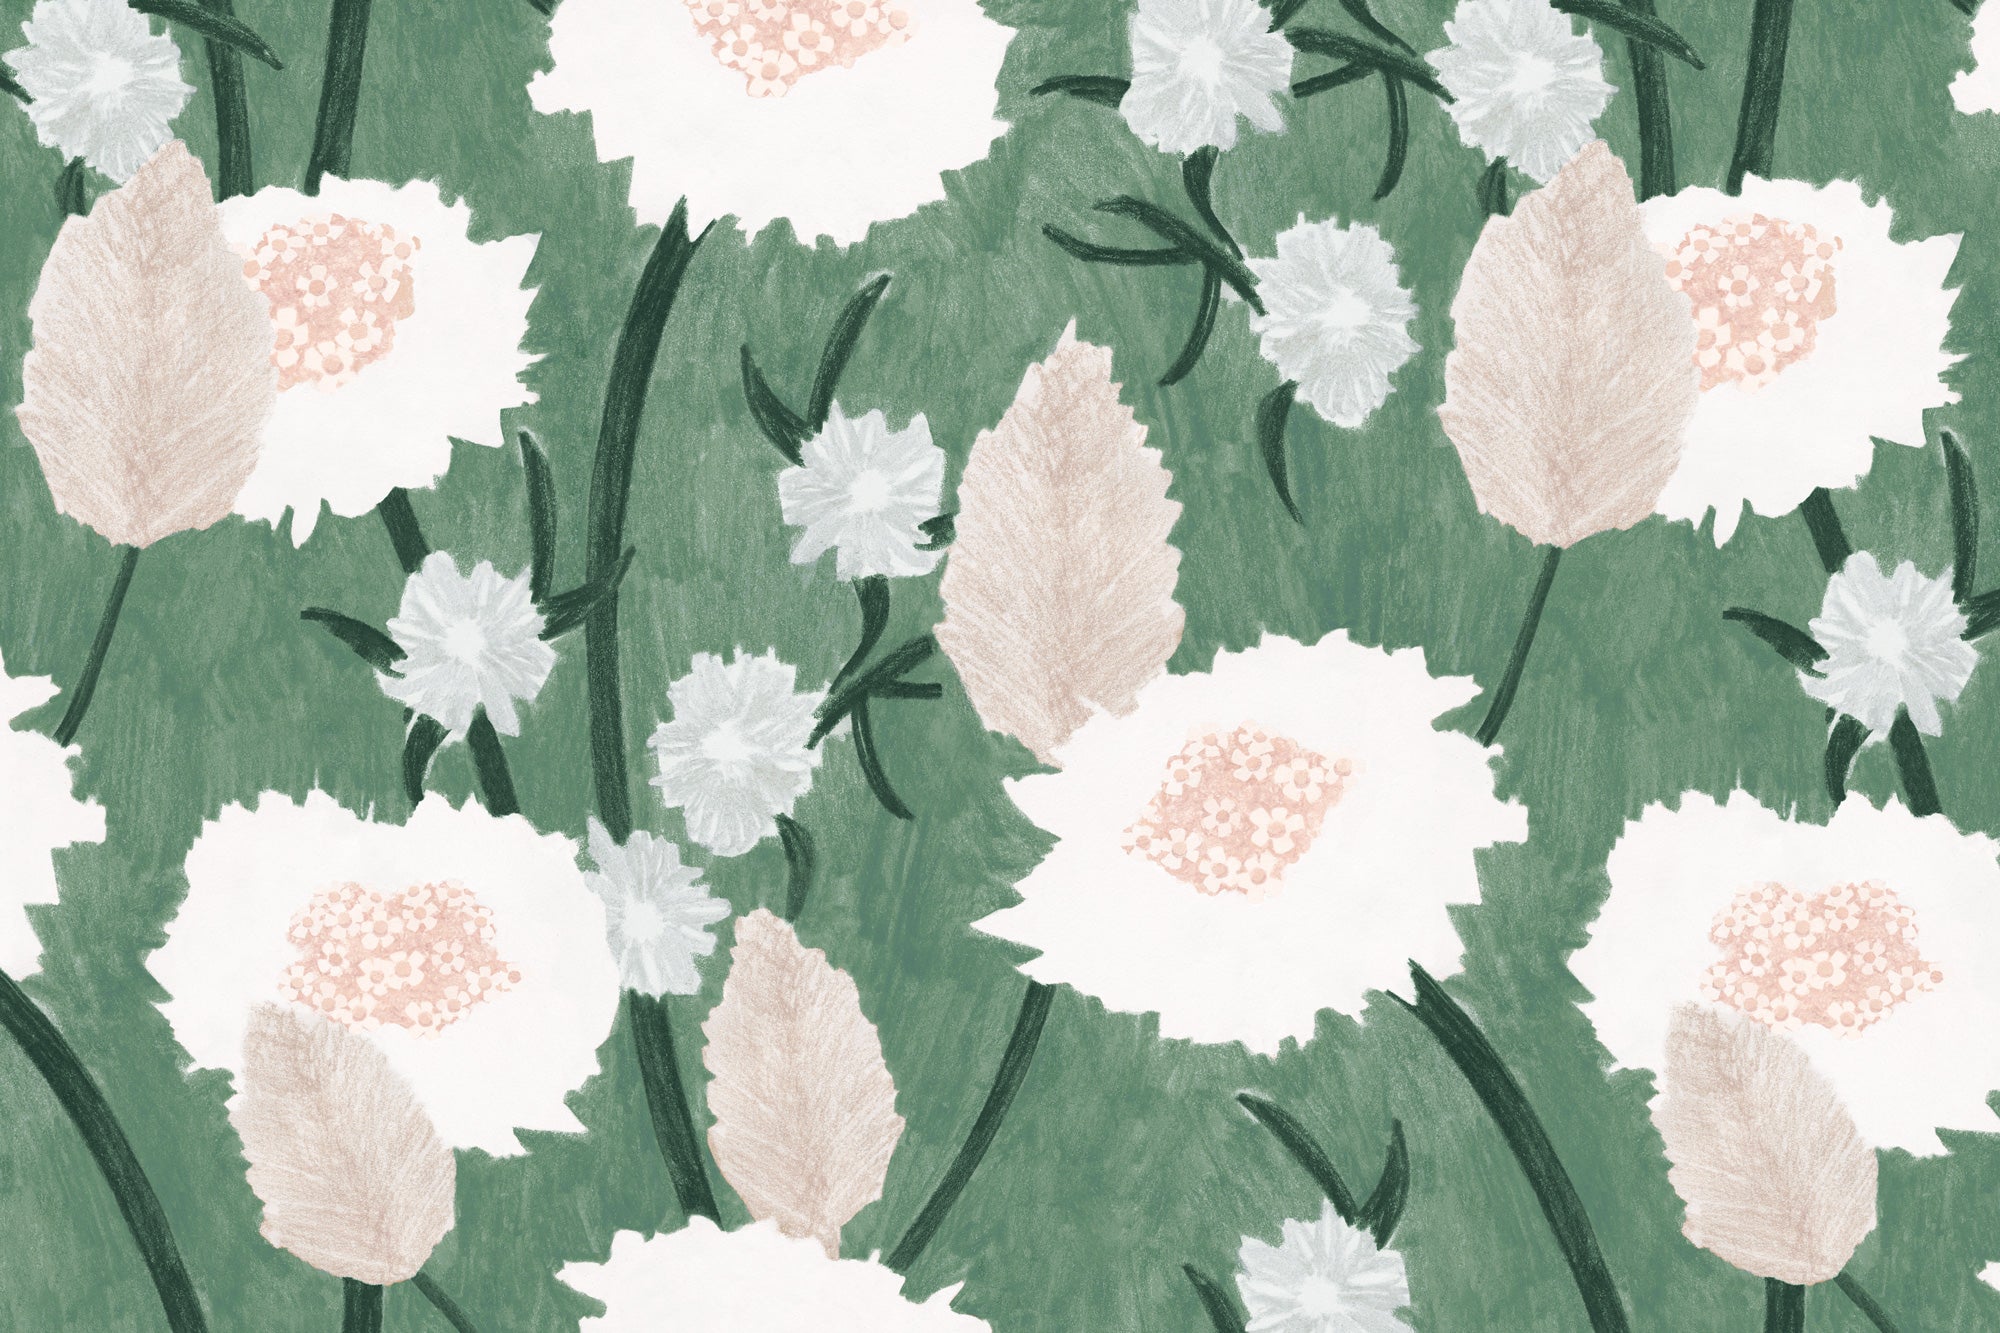 Detail of wallpaper in a playful floral print in shades of white, pink and green on a light green field.